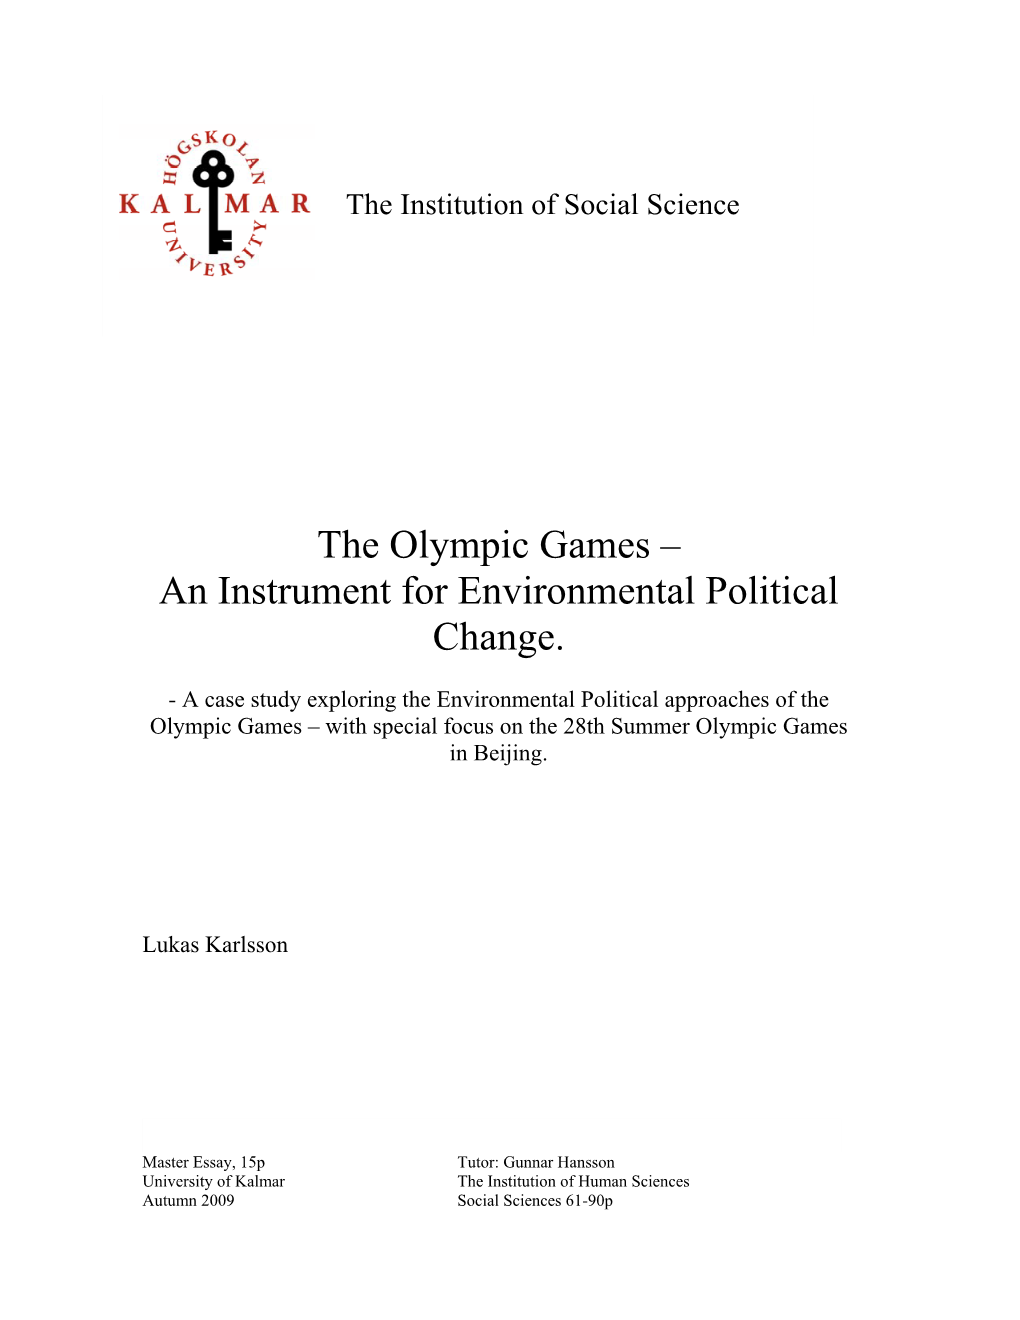 The Olympic Games – an Instrument for Environmental Political Change